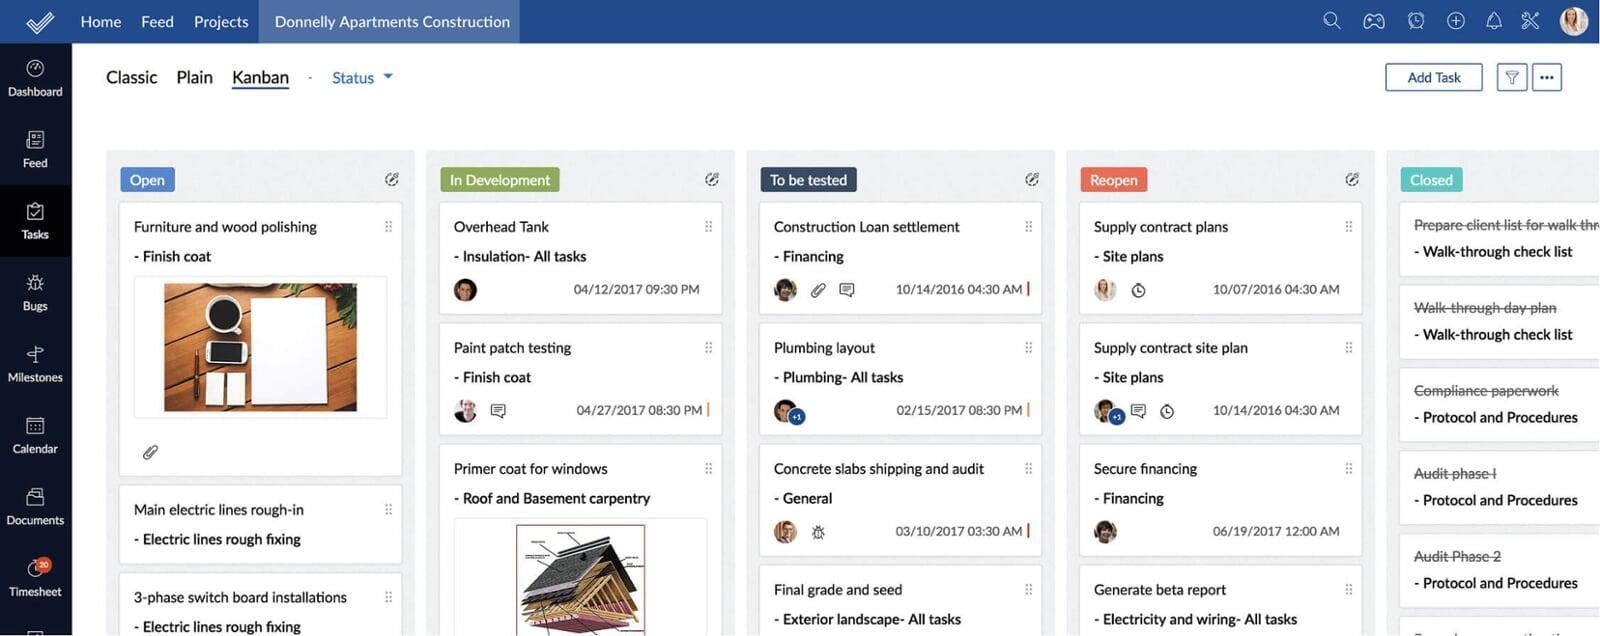 Zoho Projects task management allows great team collaboration